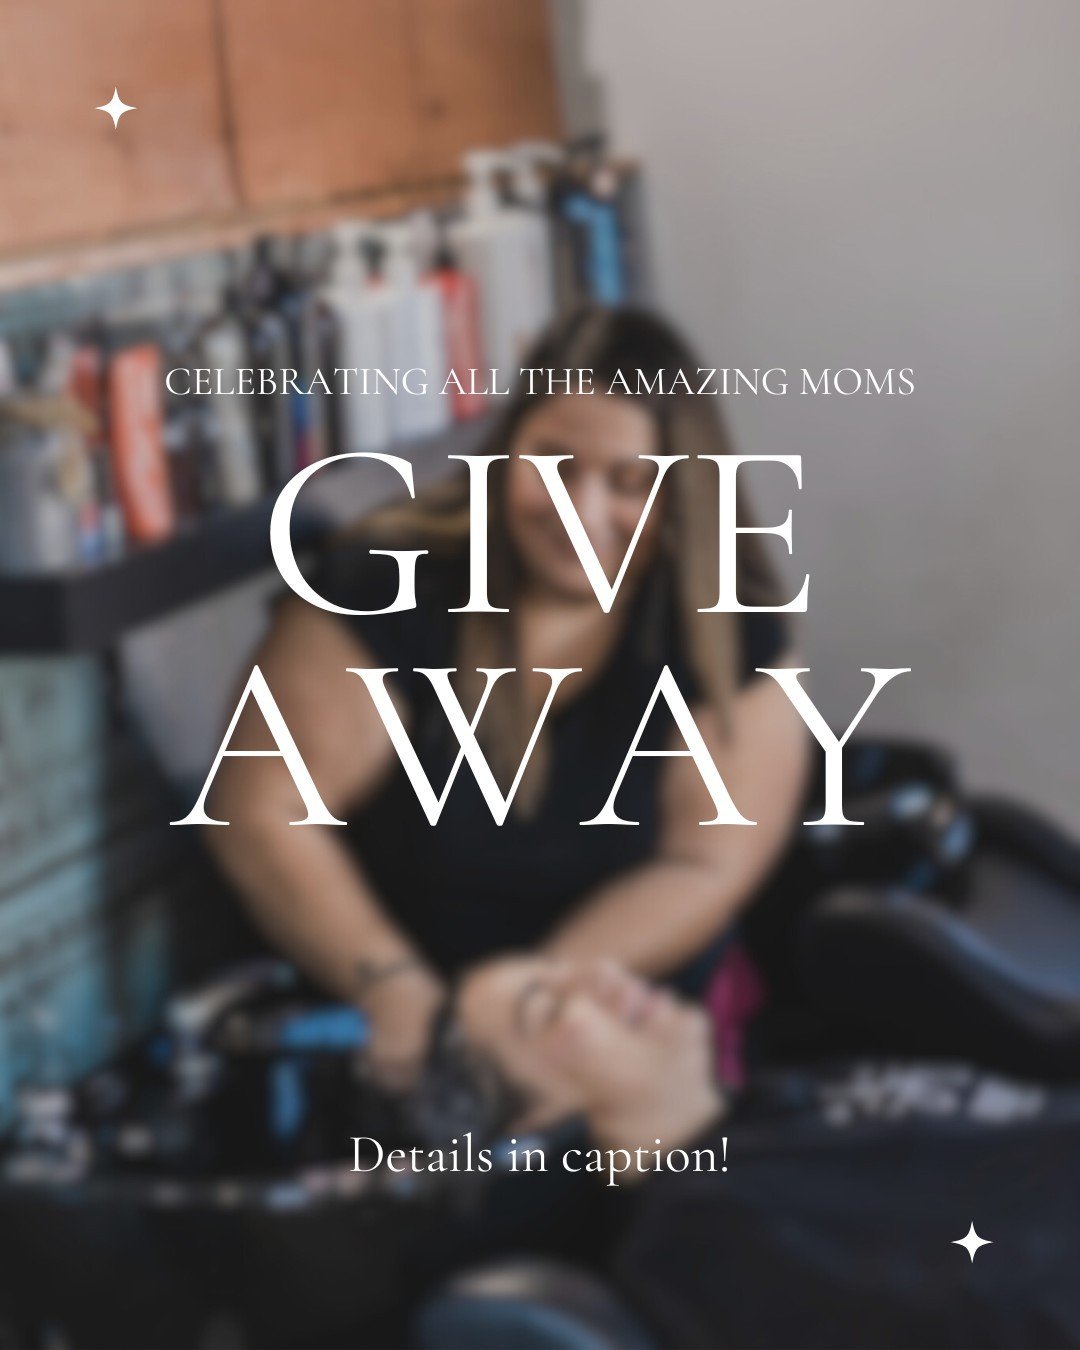 ⭐ GIVEAWAY TIME ⭐

We want to gift two deserving mothers a relaxing styling session with us!

Who do you know that deserves some pampering this Mother's Day?

Rules to enter:

❤️ Like this post
❤️ Save this post
❤️ Share it to your stories &amp; tag 